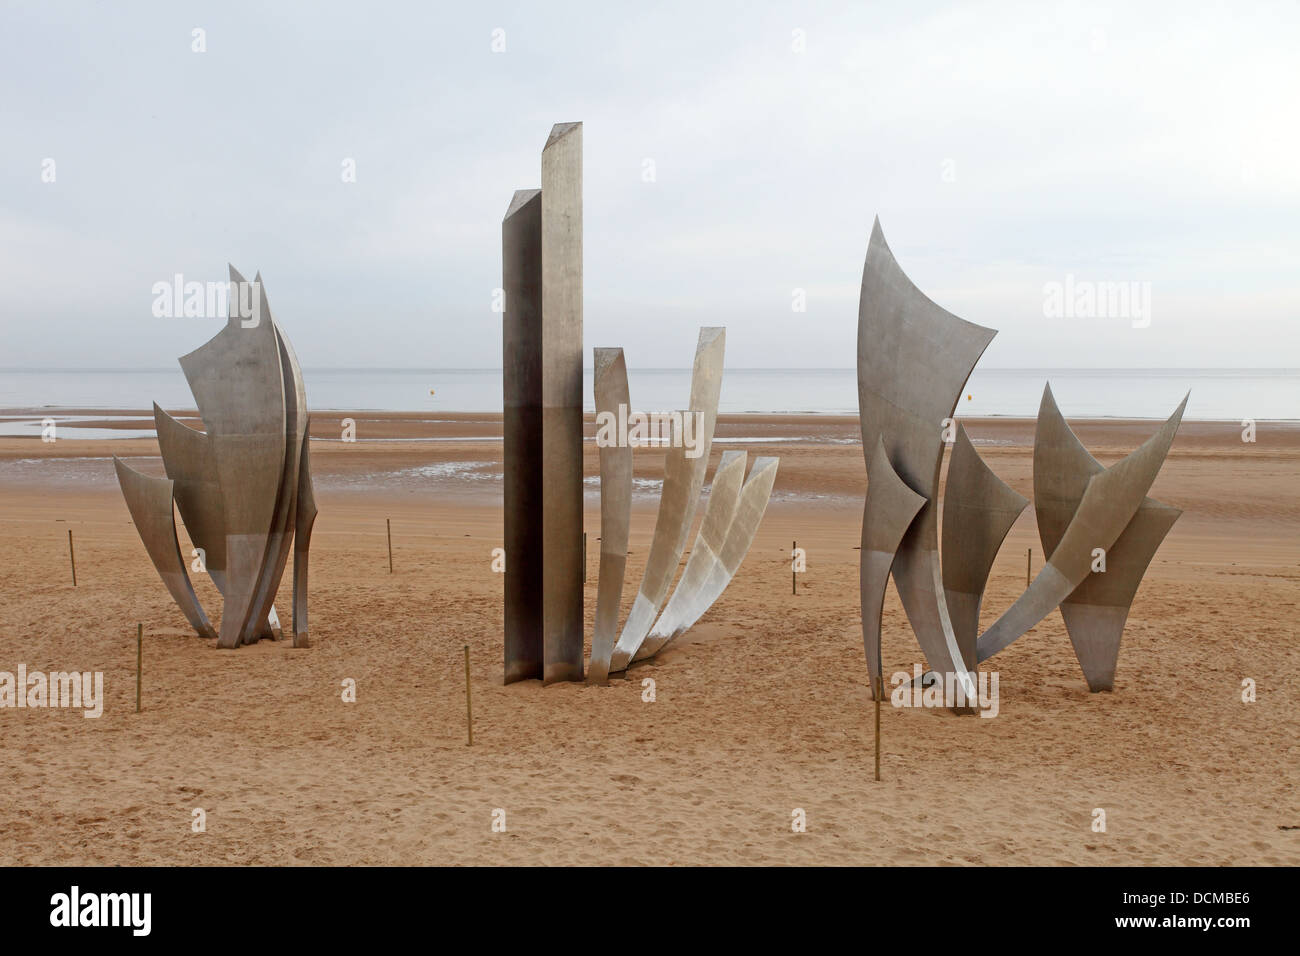 Sculpture on Omaha Beach in memory of those who died at the D-Day landings, Normandy, France Stock Photo